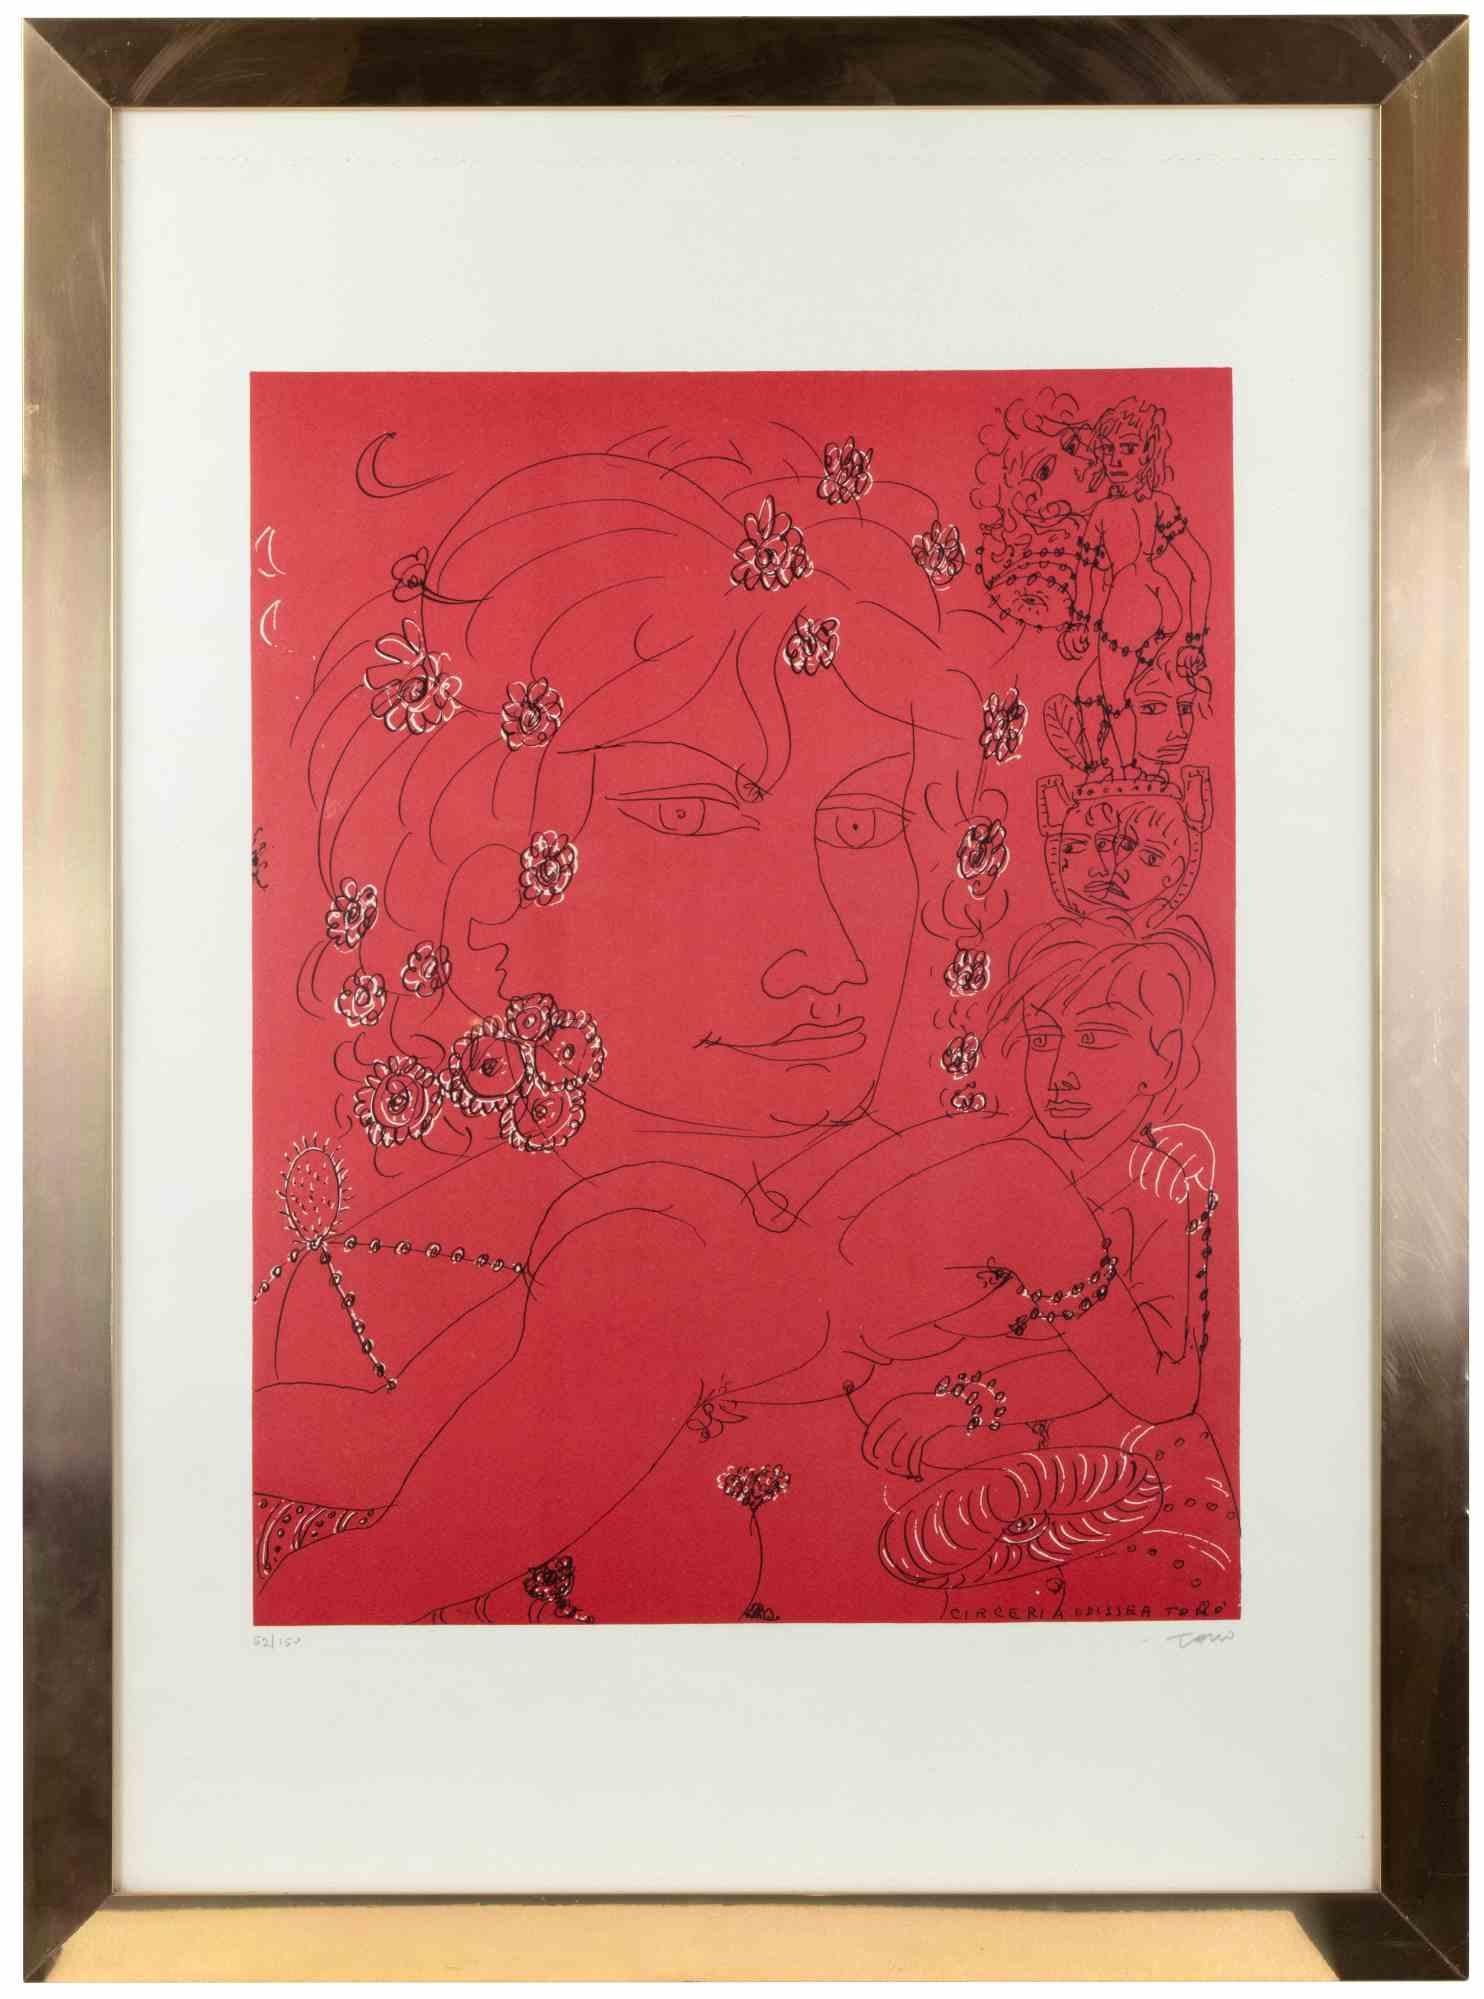 Circeria Odissea is a modern artwork realized by Tono Zancanaro.

Mixed colored lithograph.

Hand signed and numbered on the lower margin.

Edition of 52/150.

Includes frame